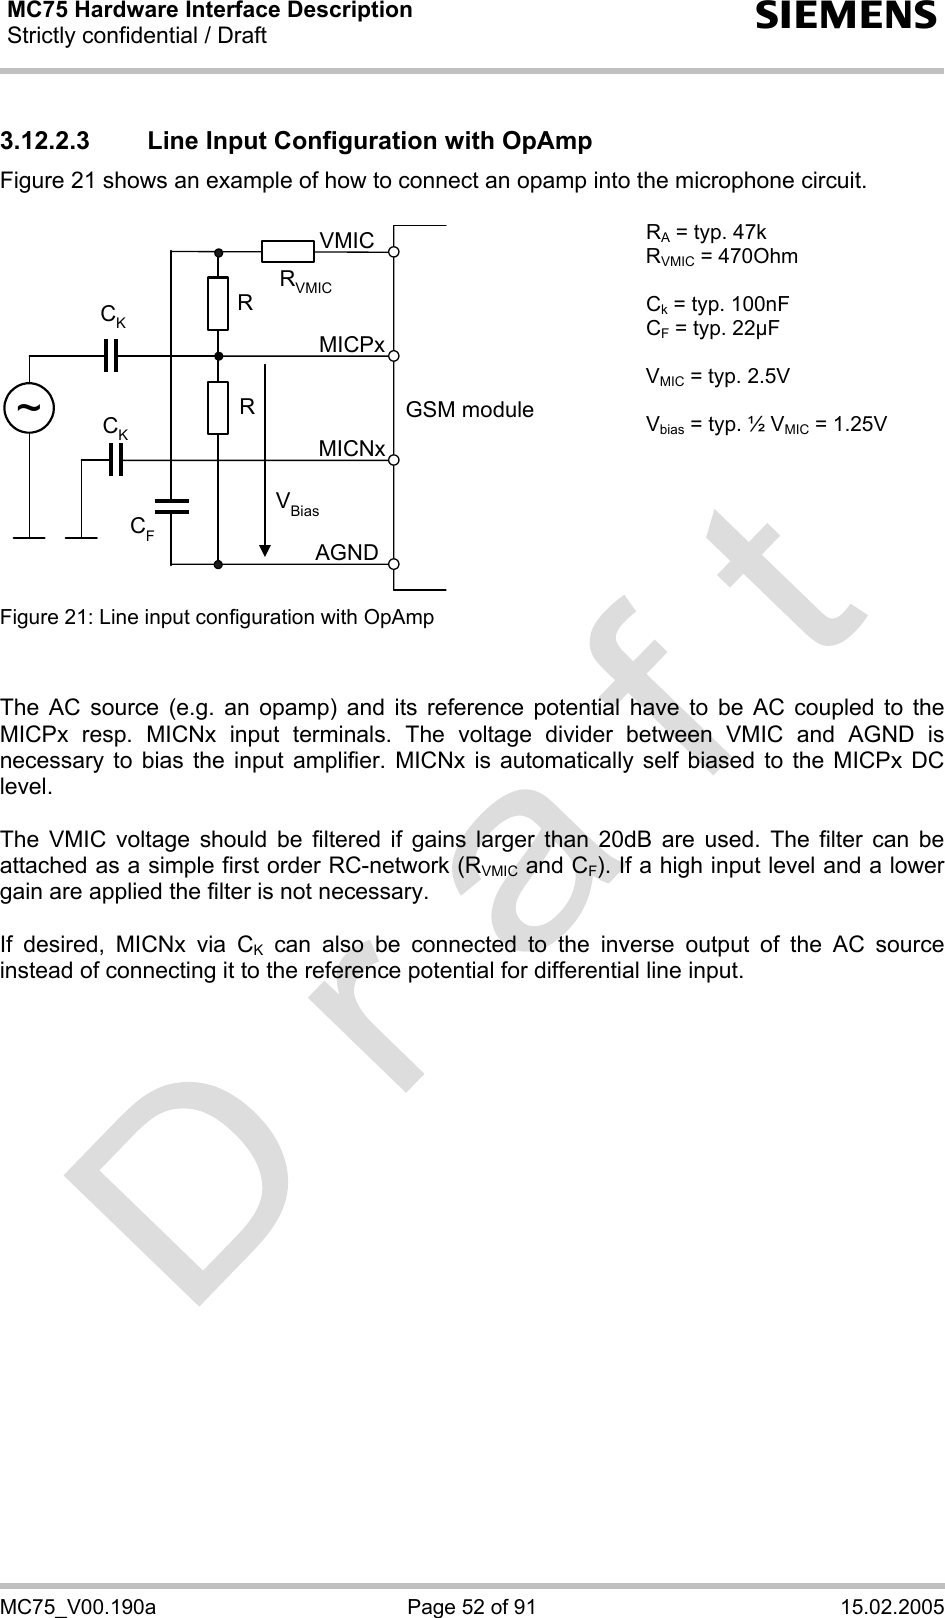 MC75 Hardware Interface Description Strictly confidential / Draft  s MC75_V00.190a  Page 52 of 91  15.02.2005 3.12.2.3  Line Input Configuration with OpAmp Figure 21 shows an example of how to connect an opamp into the microphone circuit.  GSM moduleRVBiasCKAGNDMICNxMICPxVMICRCK~RVMICCF RA = typ. 47k RVMIC = 470Ohm  Ck = typ. 100nF CF = typ. 22µF  VMIC = typ. 2.5V  Vbias = typ. ½ VMIC = 1.25V Figure 21: Line input configuration with OpAmp     The AC source (e.g. an opamp) and its reference potential have to be AC coupled to the MICPx resp. MICNx input terminals. The voltage divider between VMIC and AGND is necessary to bias the input amplifier. MICNx is automatically self biased to the MICPx DC level.   The VMIC voltage should be filtered if gains larger than 20dB are used. The filter can be attached as a simple first order RC-network (RVMIC and CF). If a high input level and a lower gain are applied the filter is not necessary.  If desired, MICNx via CK can also be connected to the inverse output of the AC source instead of connecting it to the reference potential for differential line input.    